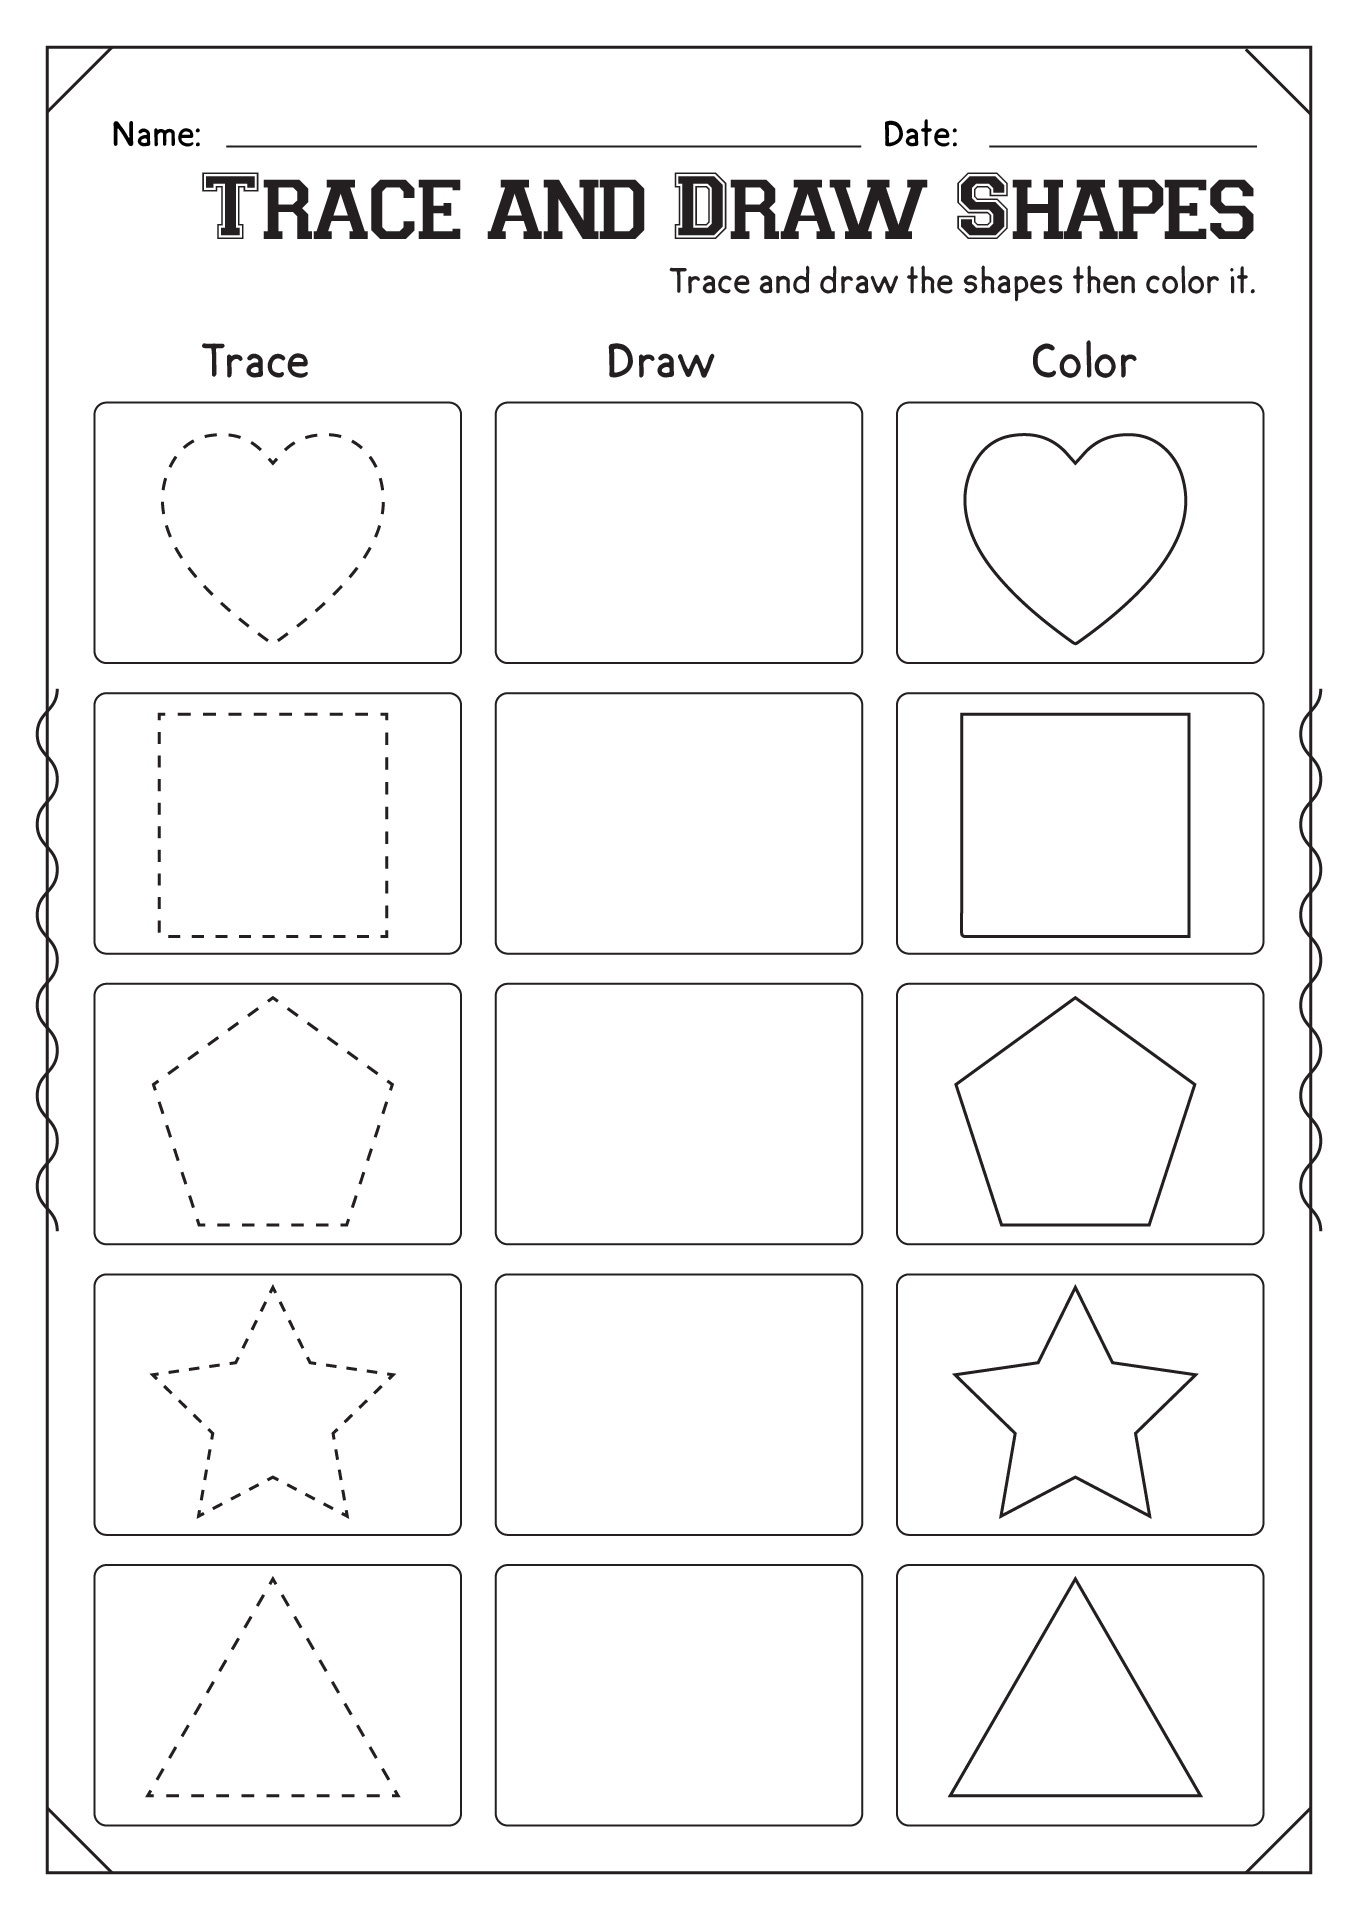 Trace and Draw Shapes Worksheet